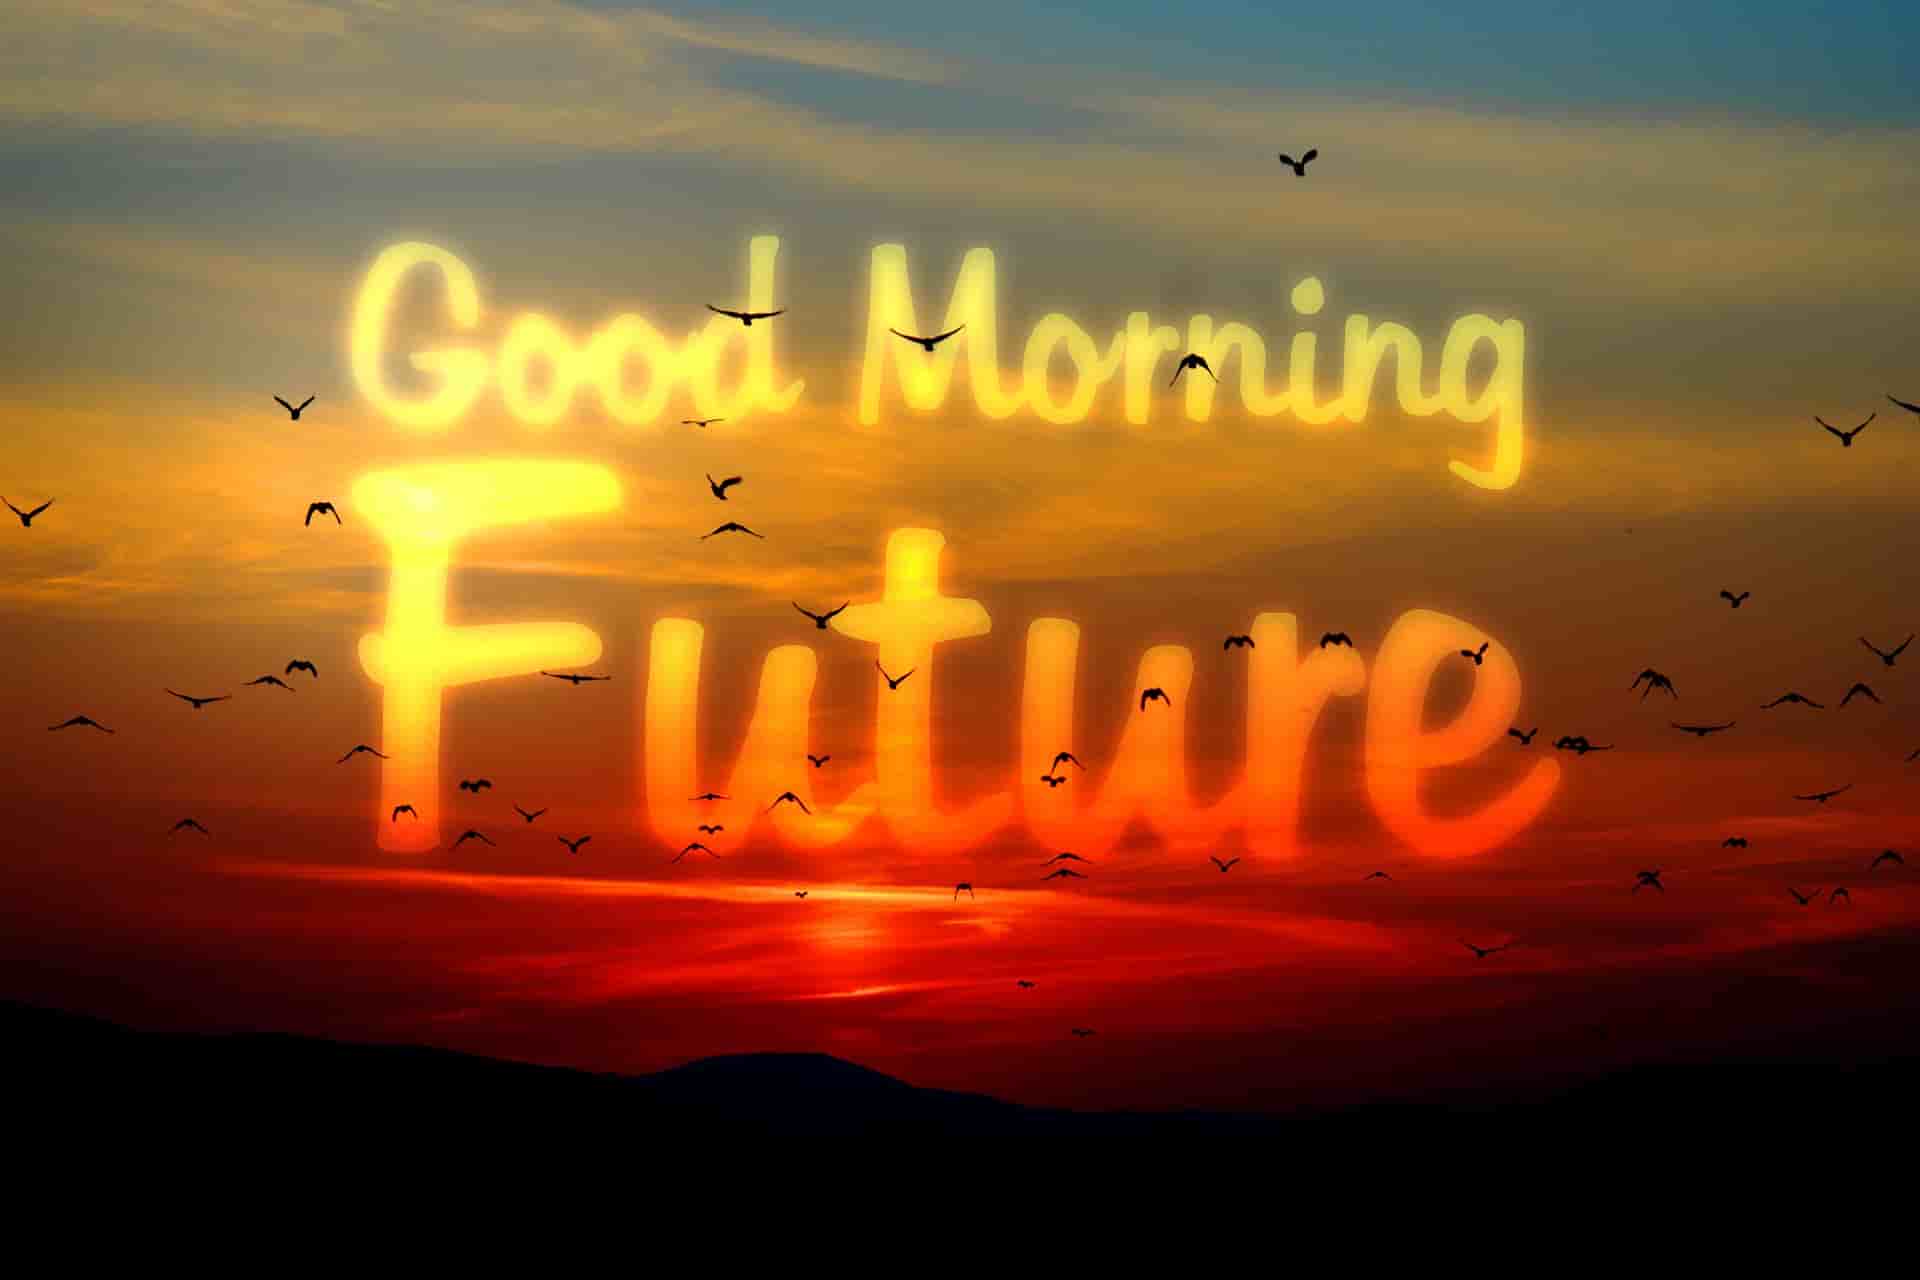 Image of Sunrise with Good Morning Future written in text